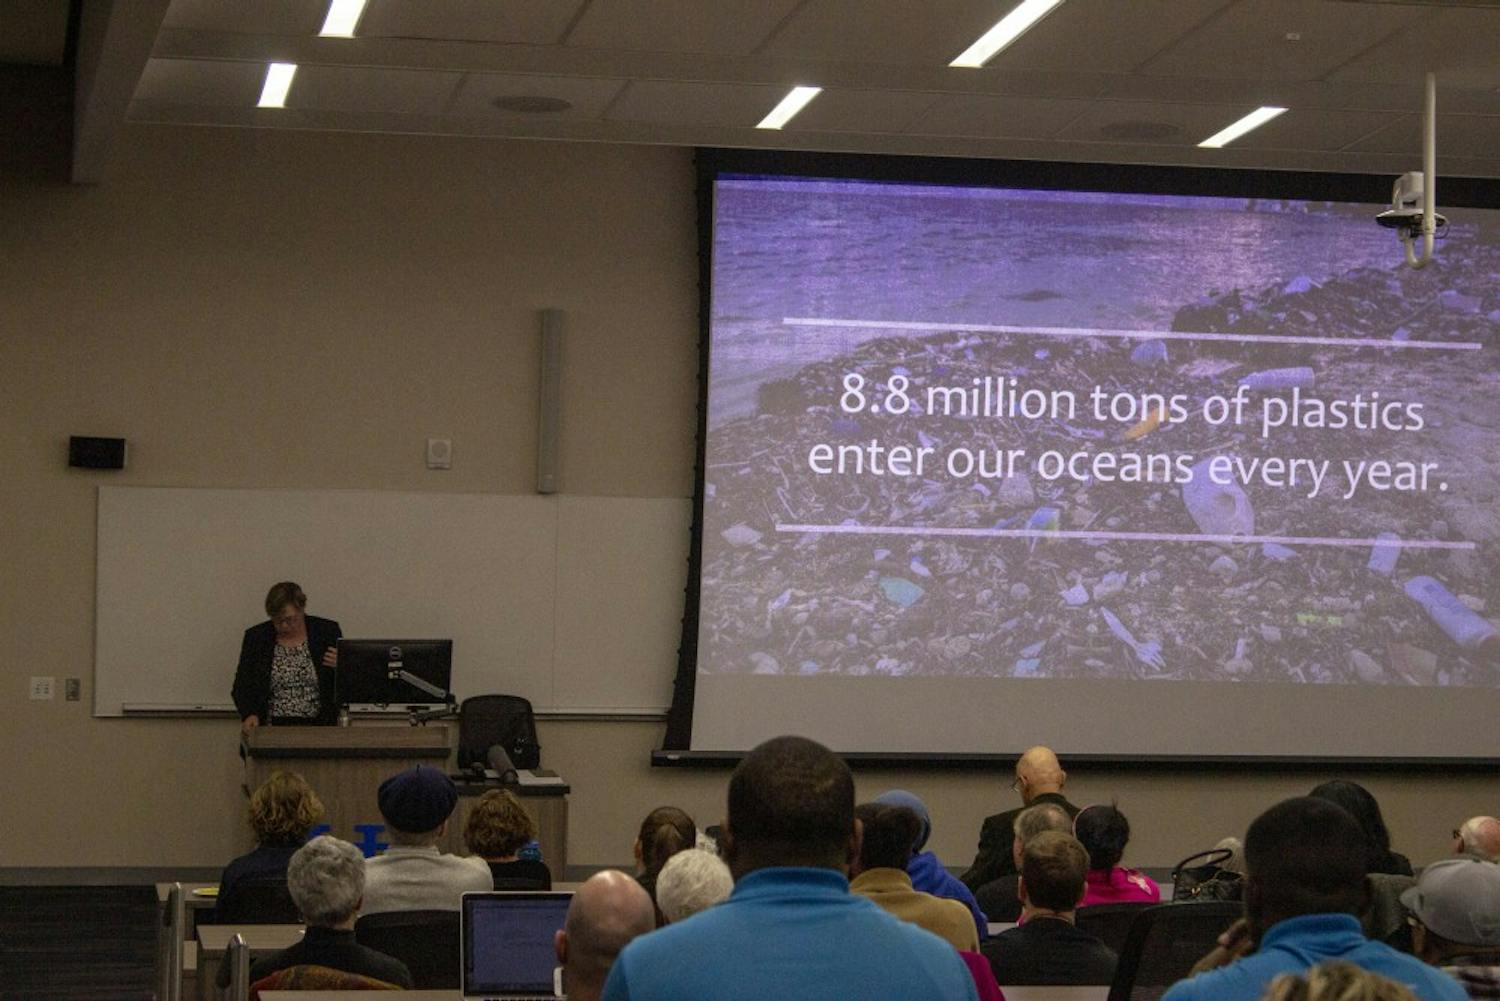 Judith Enck, a former Environmental Protection Agency regional administrator under the Obama administration, discusses the dangers of single-use plastics. Enck visited UB to discuss Beyond Plastics, a program which aims to reduce plastic pollution.